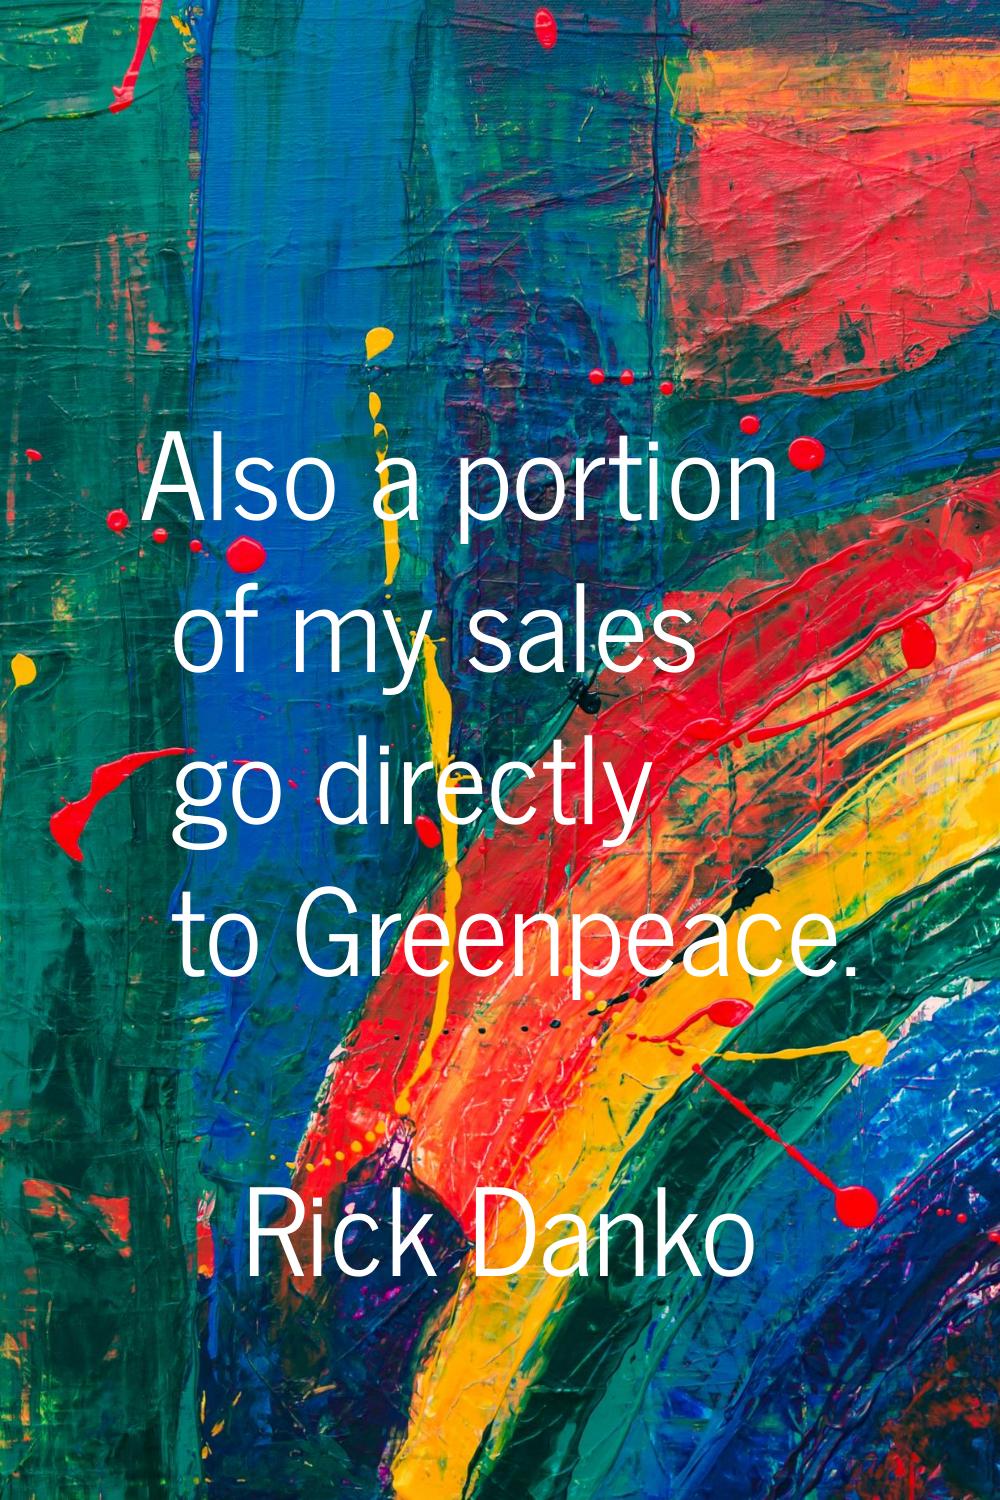 Also a portion of my sales go directly to Greenpeace.